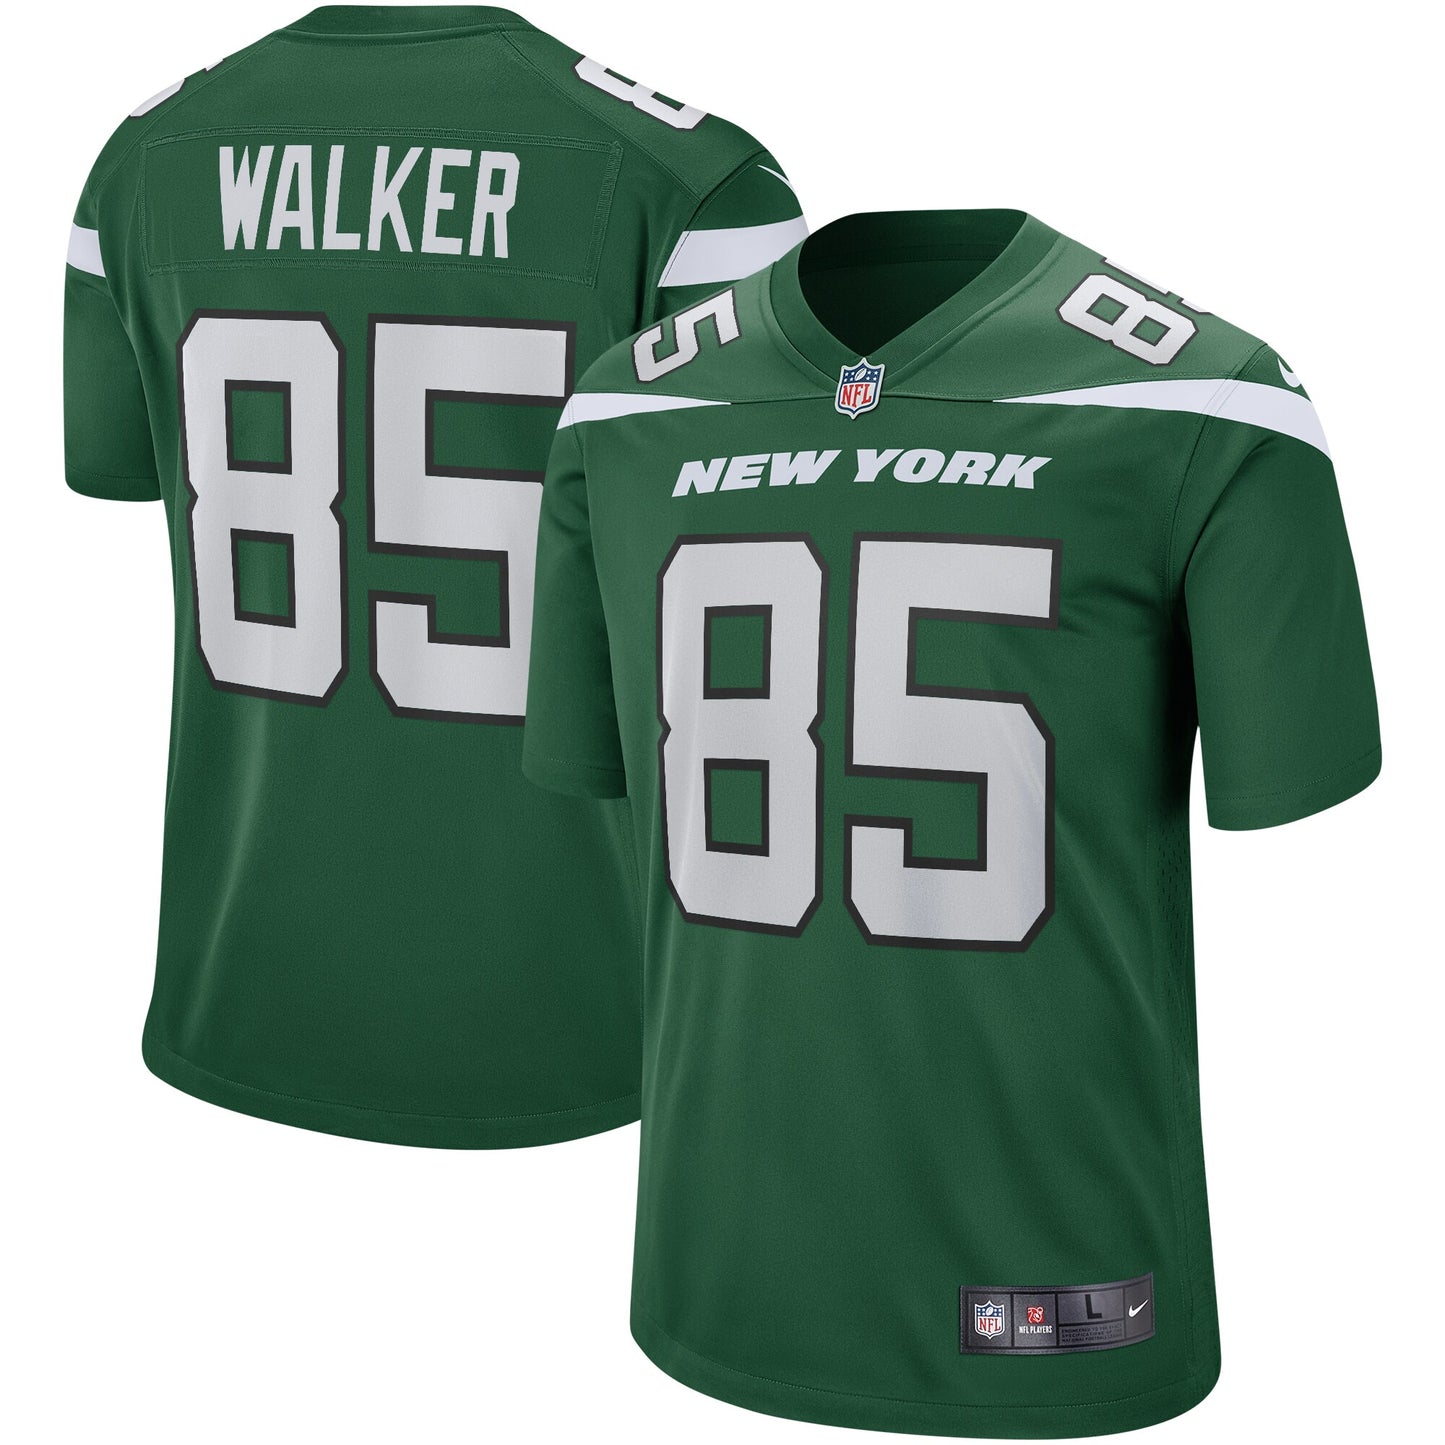 Wesley Walker New York Jets Nike Game Retired Player Jersey - Gotham Green